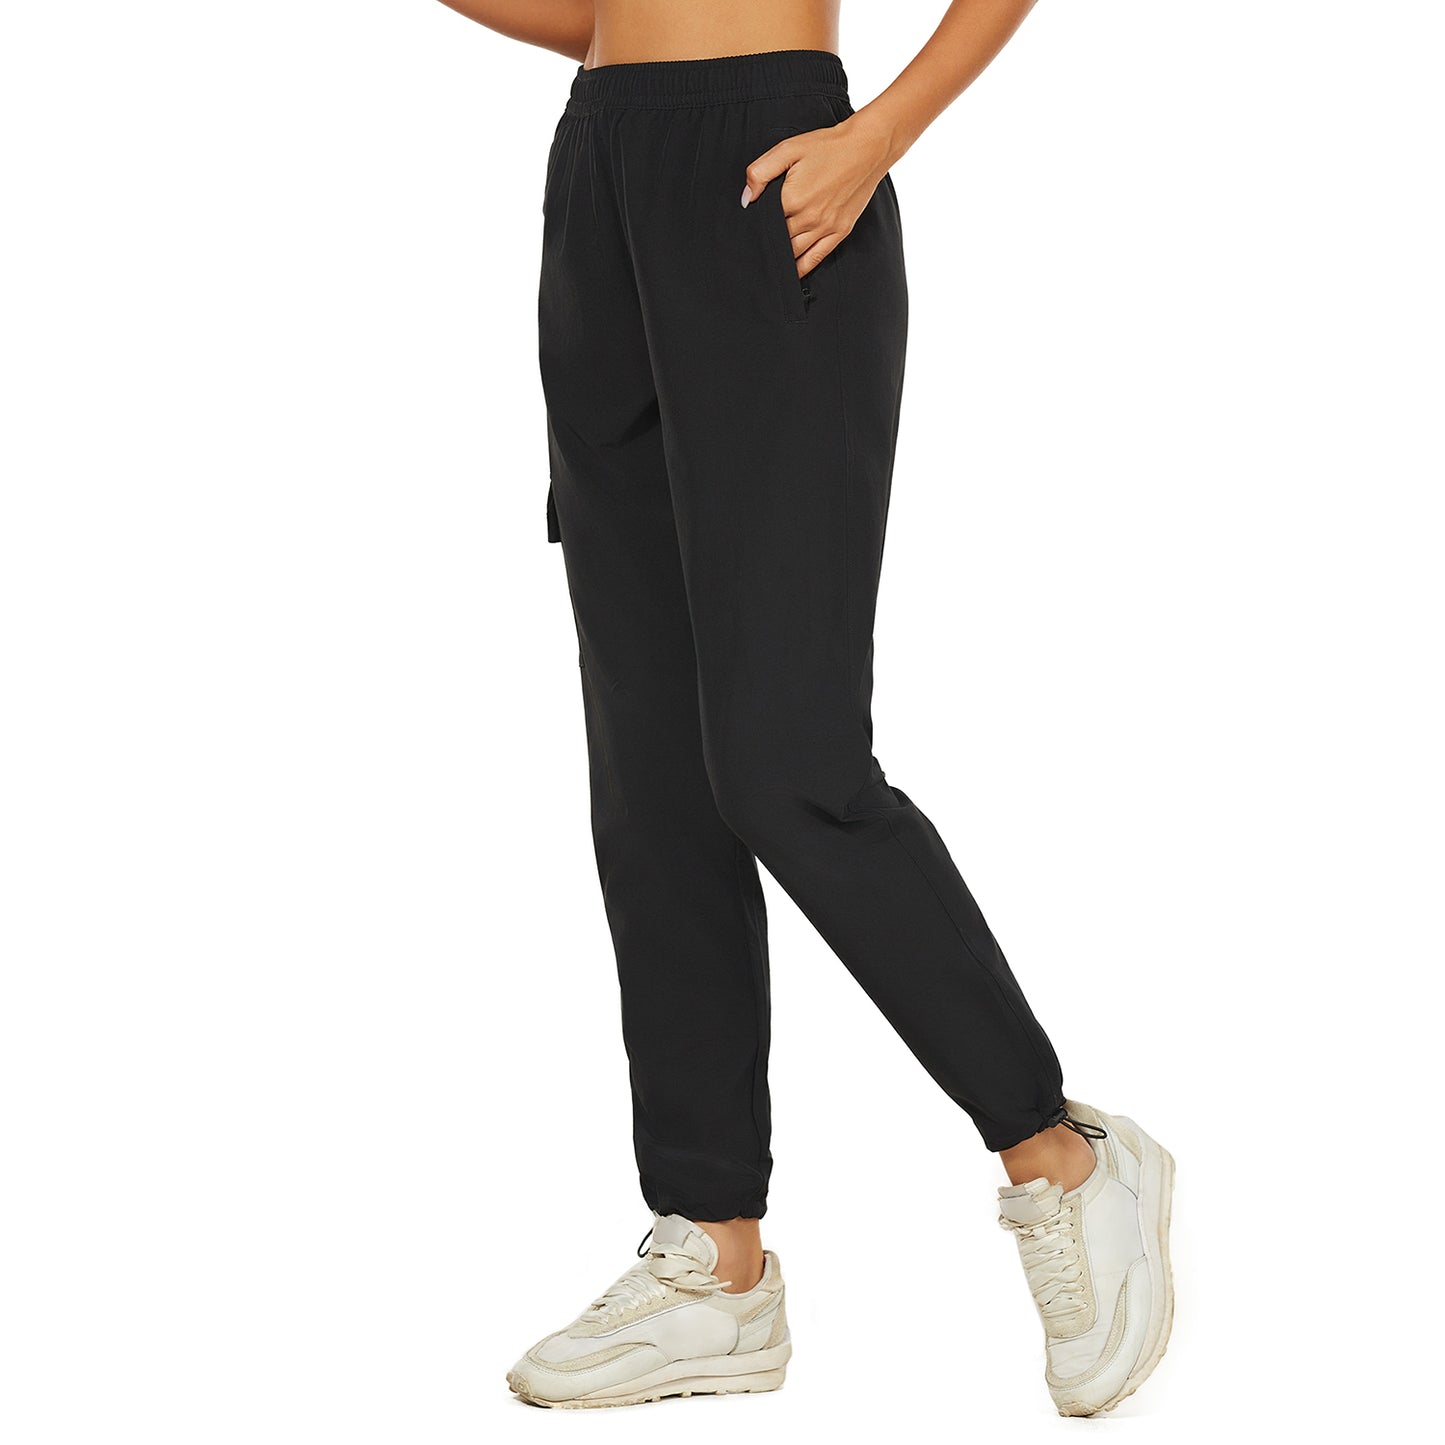 One for All High-Waisted Hiking Pants Black